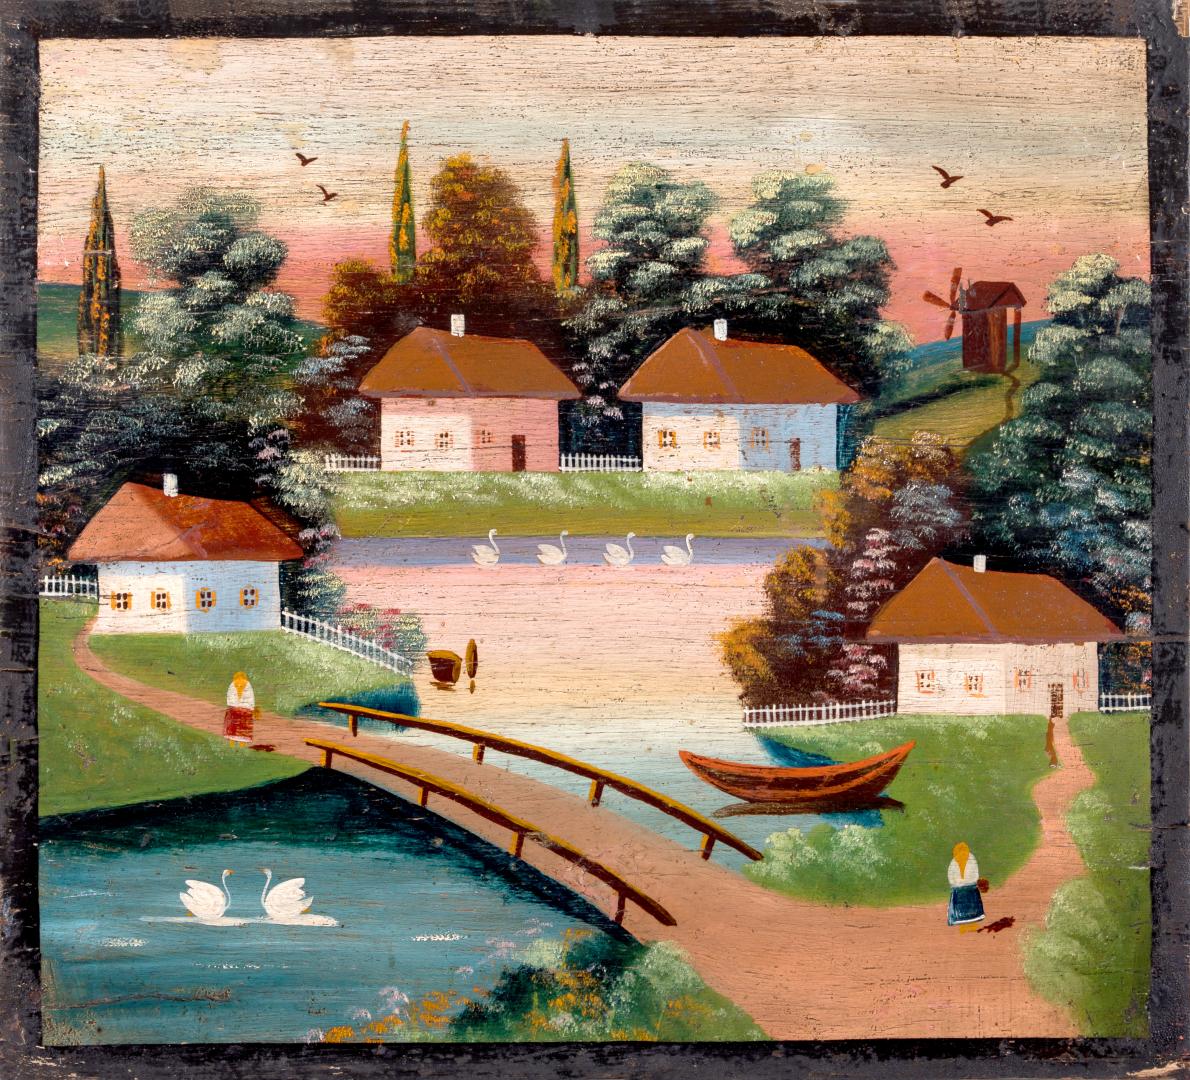 Rural landscape with a bridge and swans